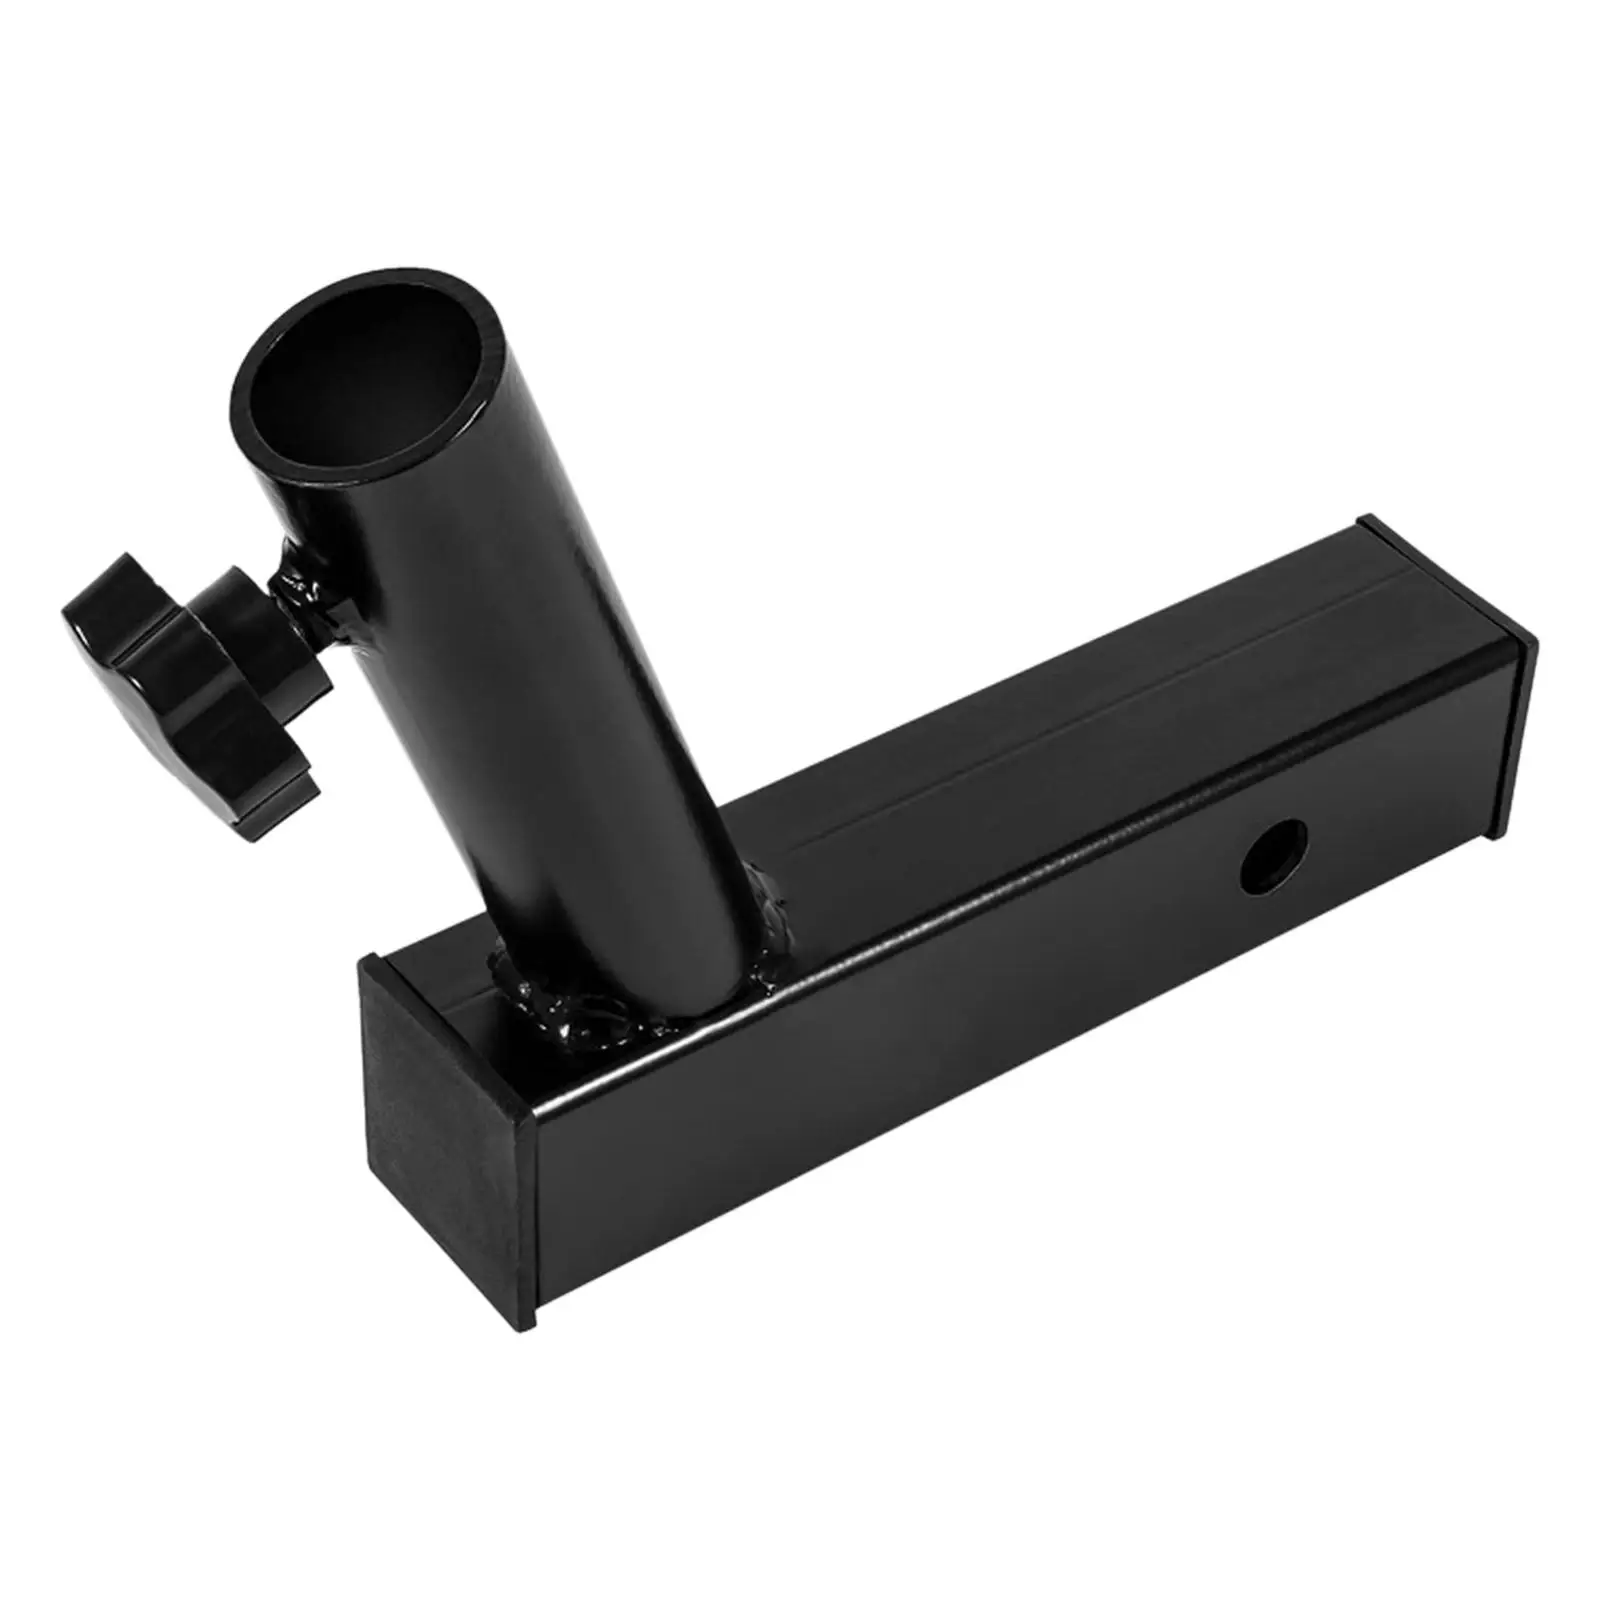 

Universal pole Mount Bracket High Strength with Mounting Hardware Rustproof Hitch Pole Holder for Truck Car